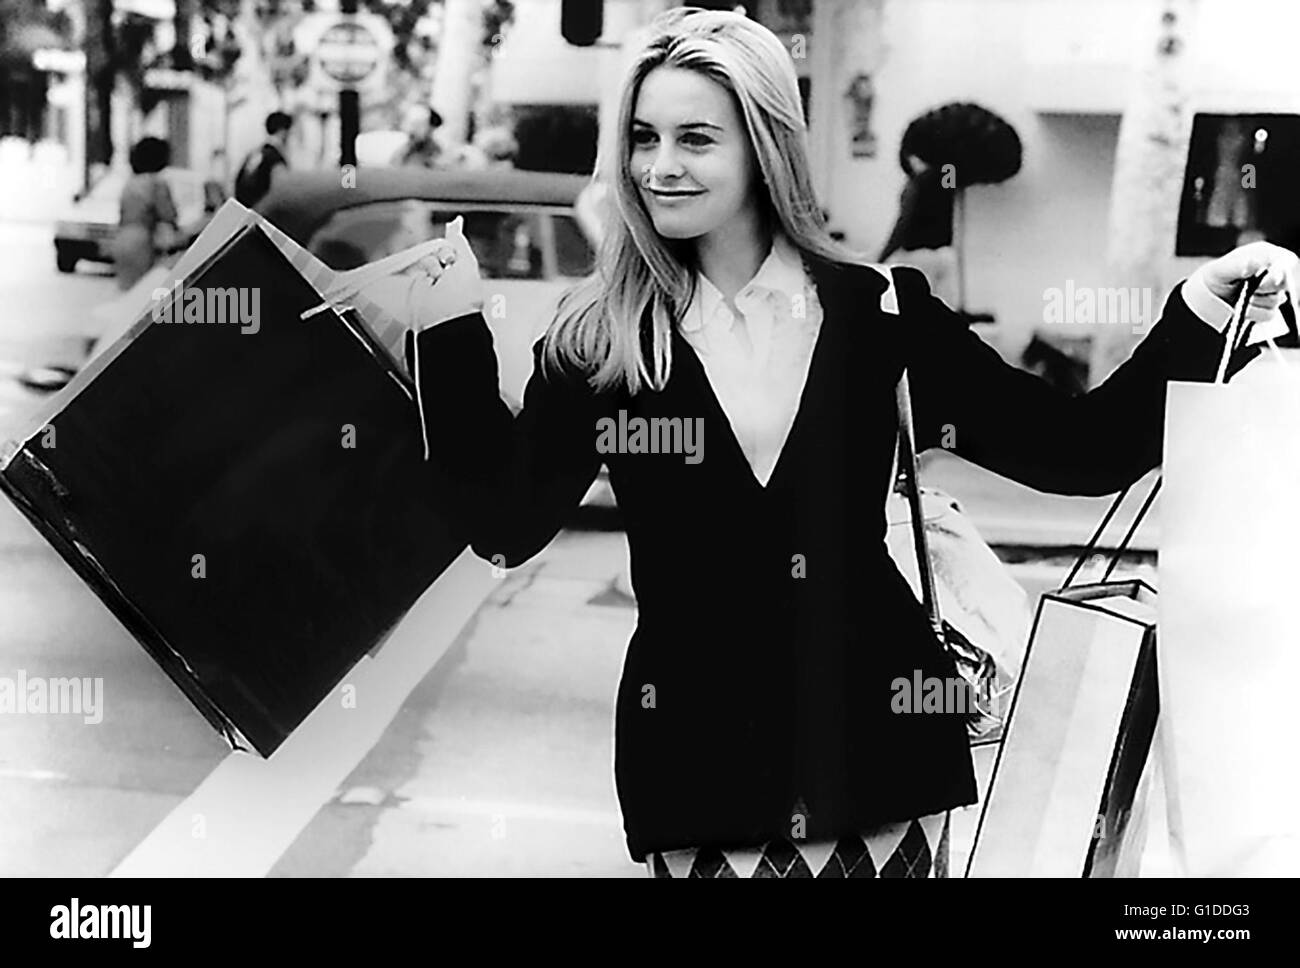 Clueless Movie High Resolution Stock Photography and Images - Alamy